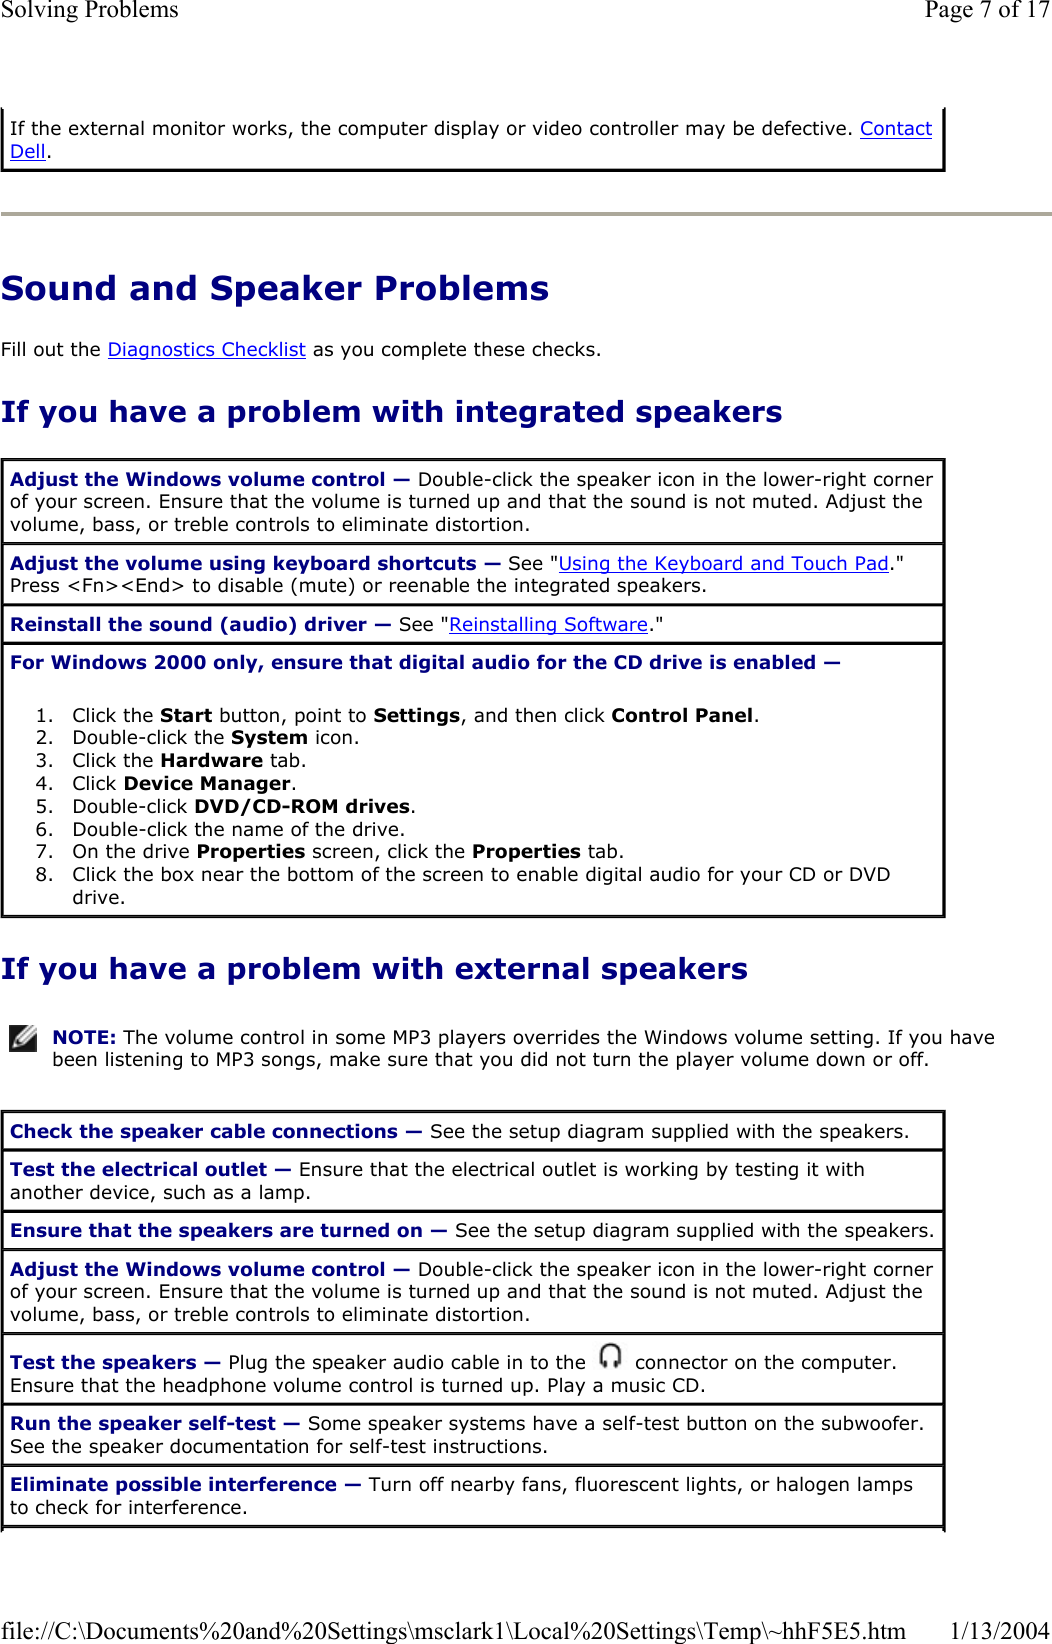 Sound and Speaker Problems Fill out the Diagnostics Checklist as you complete these checks. If you have a problem with integrated speakers If you have a problem with external speakers If the external monitor works, the computer display or video controller may be defective. ContactDell.Adjust the Windows volume control — Double-click the speaker icon in the lower-right corner of your screen. Ensure that the volume is turned up and that the sound is not muted. Adjust the volume, bass, or treble controls to eliminate distortion. Adjust the volume using keyboard shortcuts — See &quot;Using the Keyboard and Touch Pad.&quot;Press &lt;Fn&gt;&lt;End&gt; to disable (mute) or reenable the integrated speakers. Reinstall the sound (audio) driver — See &quot;Reinstalling Software.&quot; For Windows 2000 only, ensure that digital audio for the CD drive is enabled —1. Click the Start button, point to Settings, and then click Control Panel.2. Double-click the System icon.  3. Click the Hardware tab.  4. Click Device Manager.5. Double-click DVD/CD-ROM drives.6. Double-click the name of the drive.  7. On the drive Properties screen, click the Properties tab.  8. Click the box near the bottom of the screen to enable digital audio for your CD or DVD drive.  NOTE: The volume control in some MP3 players overrides the Windows volume setting. If you have been listening to MP3 songs, make sure that you did not turn the player volume down or off.Check the speaker cable connections — See the setup diagram supplied with the speakers. Test the electrical outlet — Ensure that the electrical outlet is working by testing it with another device, such as a lamp. Ensure that the speakers are turned on — See the setup diagram supplied with the speakers. Adjust the Windows volume control — Double-click the speaker icon in the lower-right corner of your screen. Ensure that the volume is turned up and that the sound is not muted. Adjust the volume, bass, or treble controls to eliminate distortion. Test the speakers — Plug the speaker audio cable in to the   connector on the computer. Ensure that the headphone volume control is turned up. Play a music CD. Run the speaker self-test — Some speaker systems have a self-test button on the subwoofer. See the speaker documentation for self-test instructions.  Eliminate possible interference — Turn off nearby fans, fluorescent lights, or halogen lamps to check for interference. Page 7 of 17Solving Problems1/13/2004file://C:\Documents%20and%20Settings\msclark1\Local%20Settings\Temp\~hhF5E5.htm